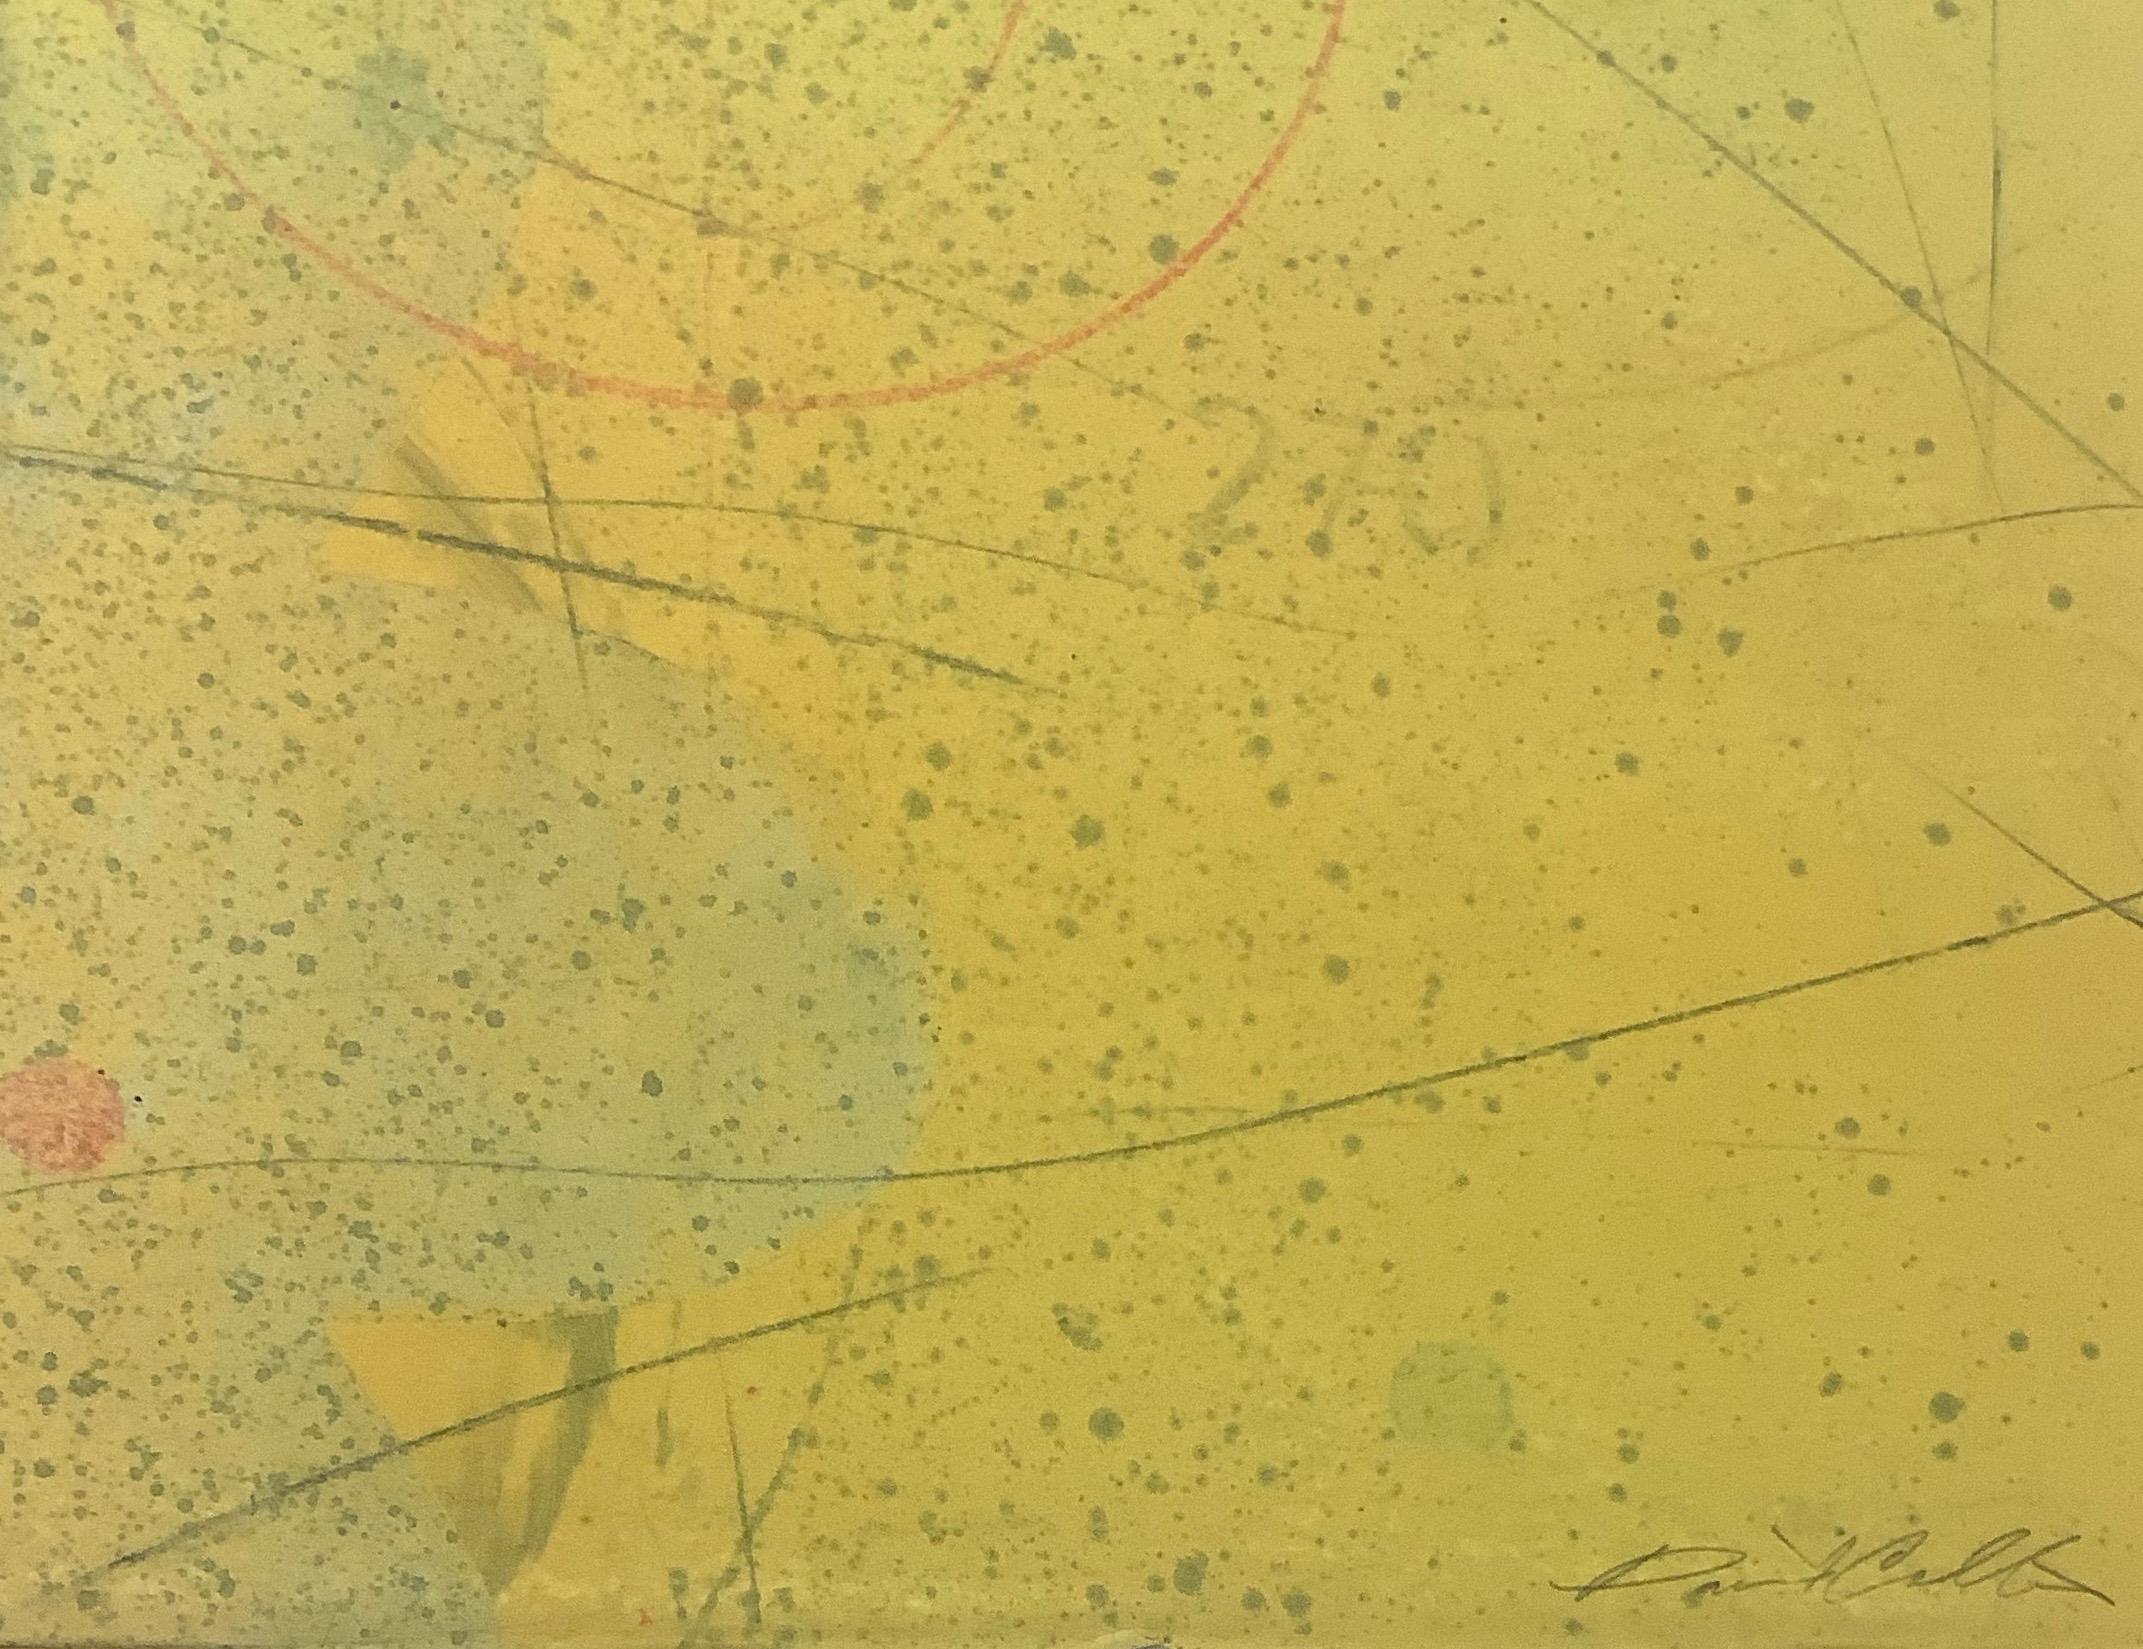 Navigator XIII, Yellow, Red Vertical Abstract Monotype with Black Star, Circles For Sale 3